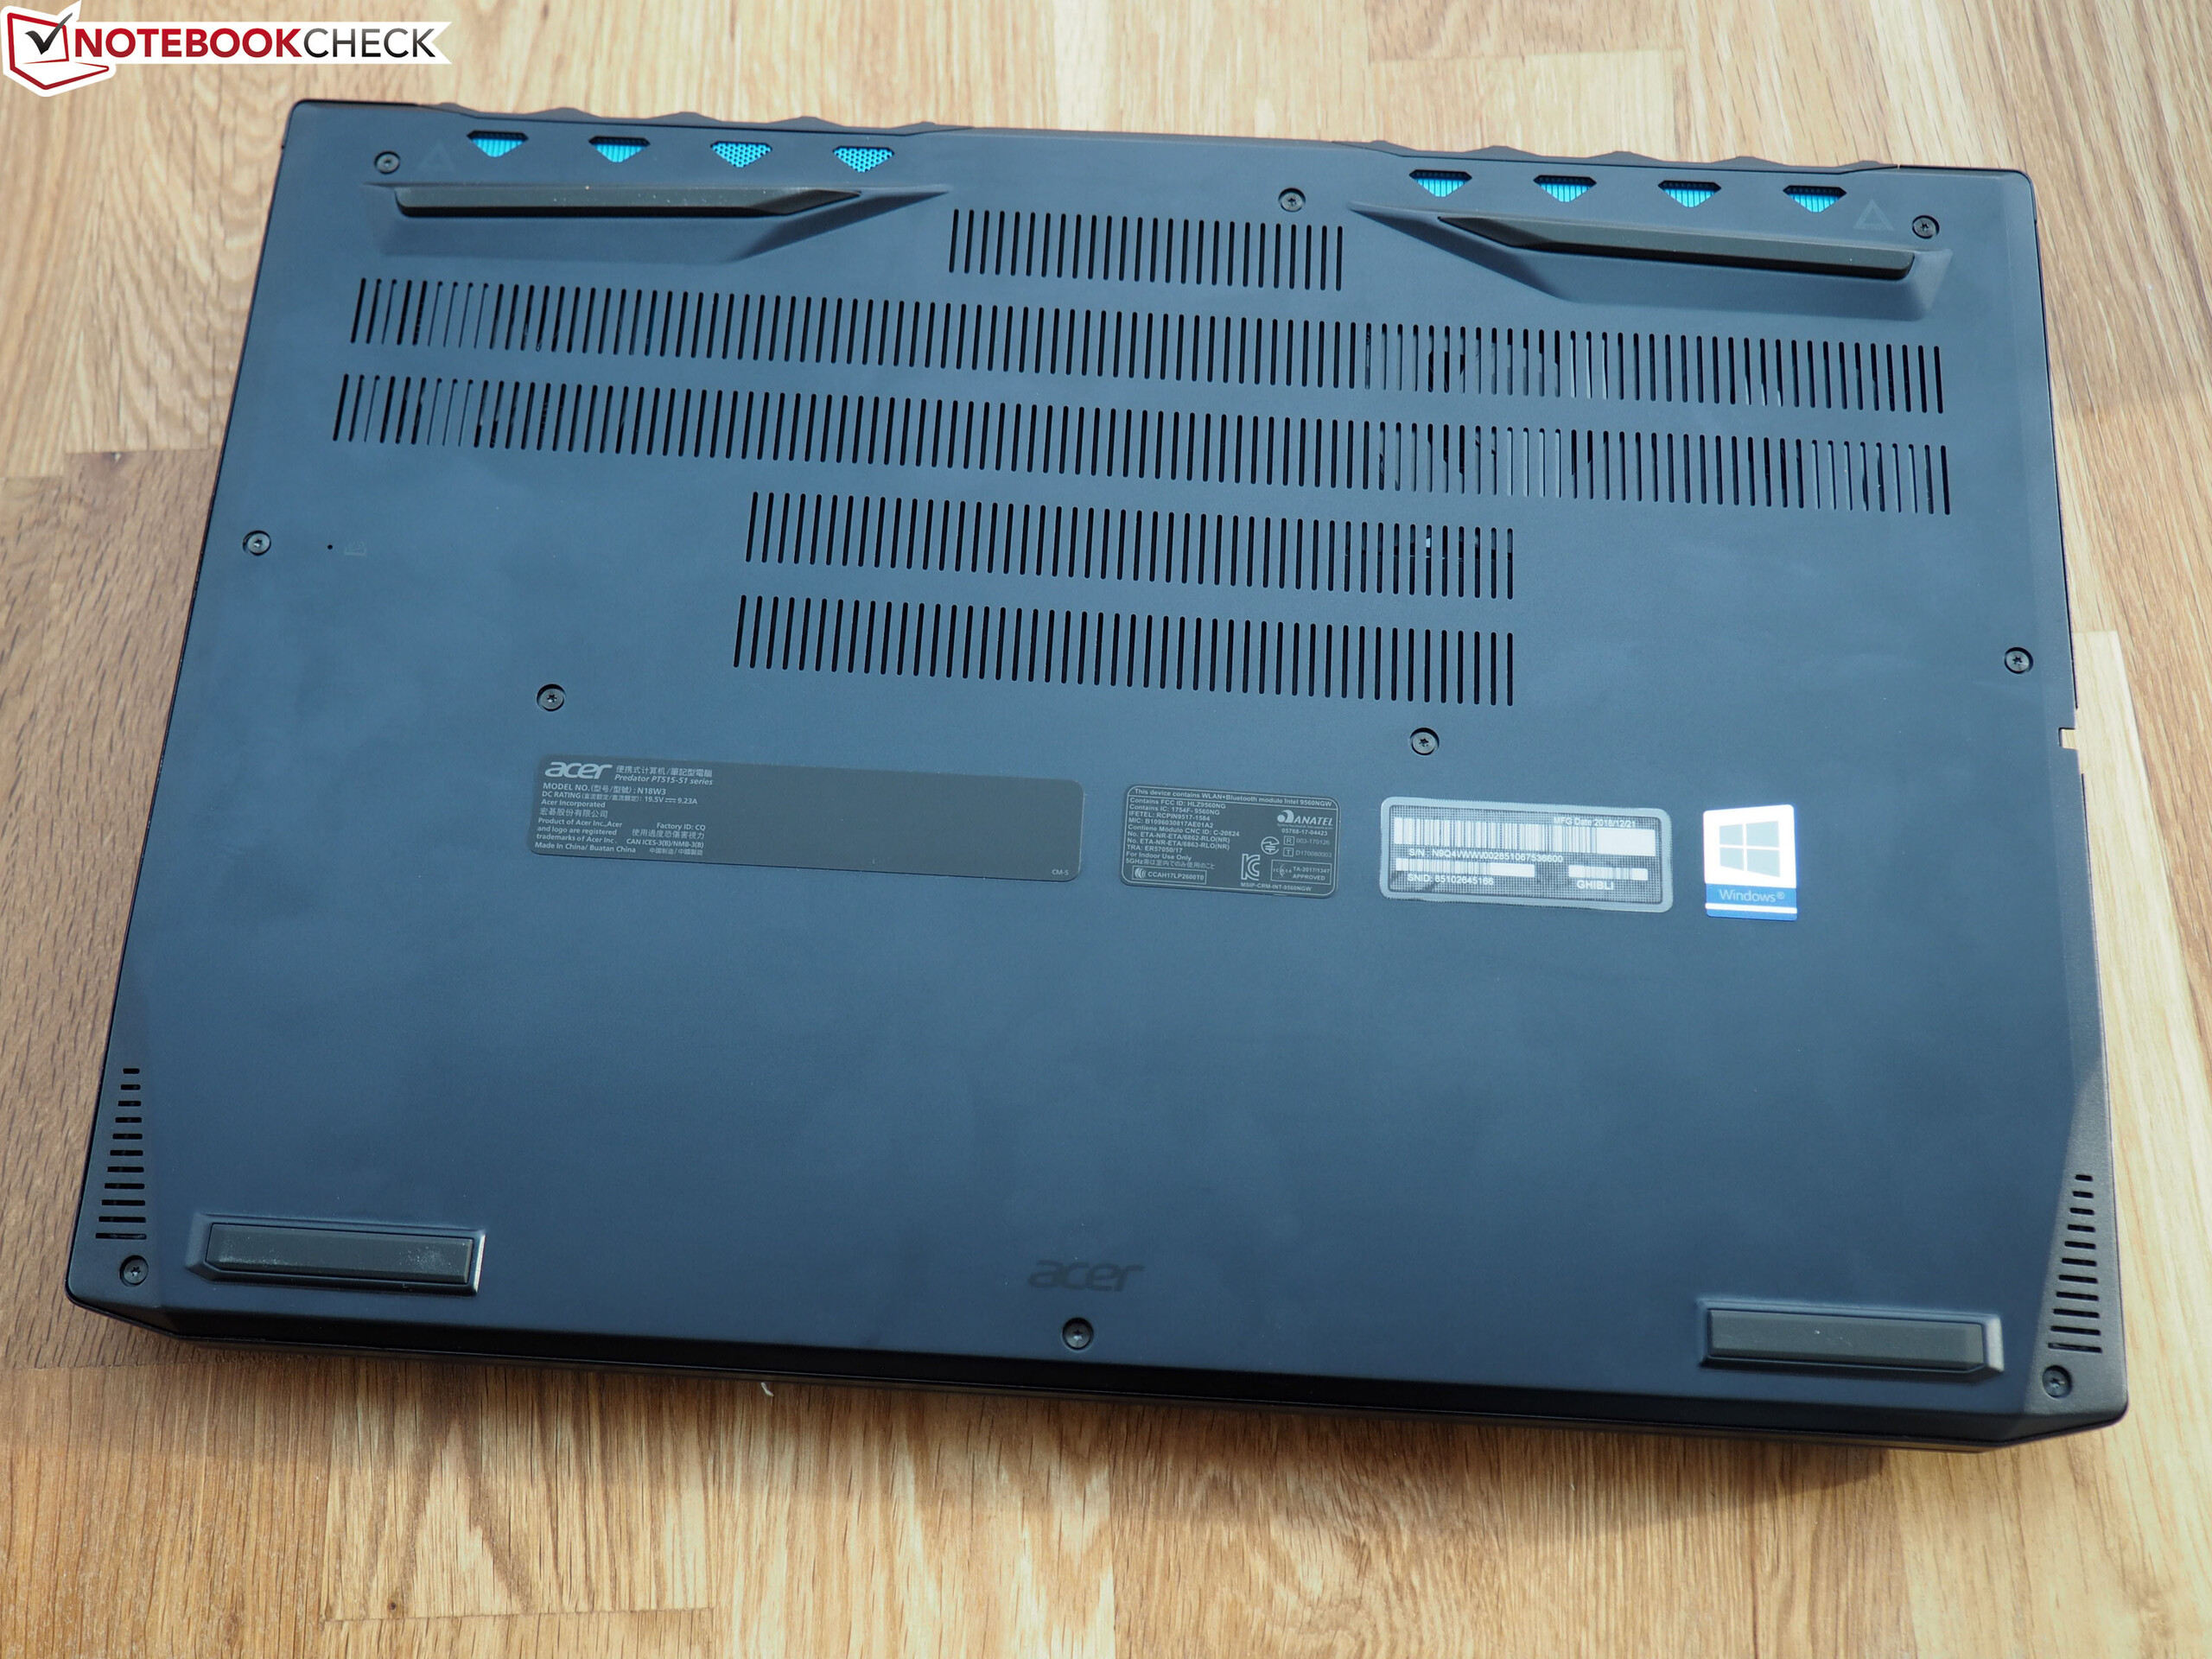 Acer Predator 500 Laptop Review: A Lot of Gaming Performance Case - NotebookCheck.net Reviews